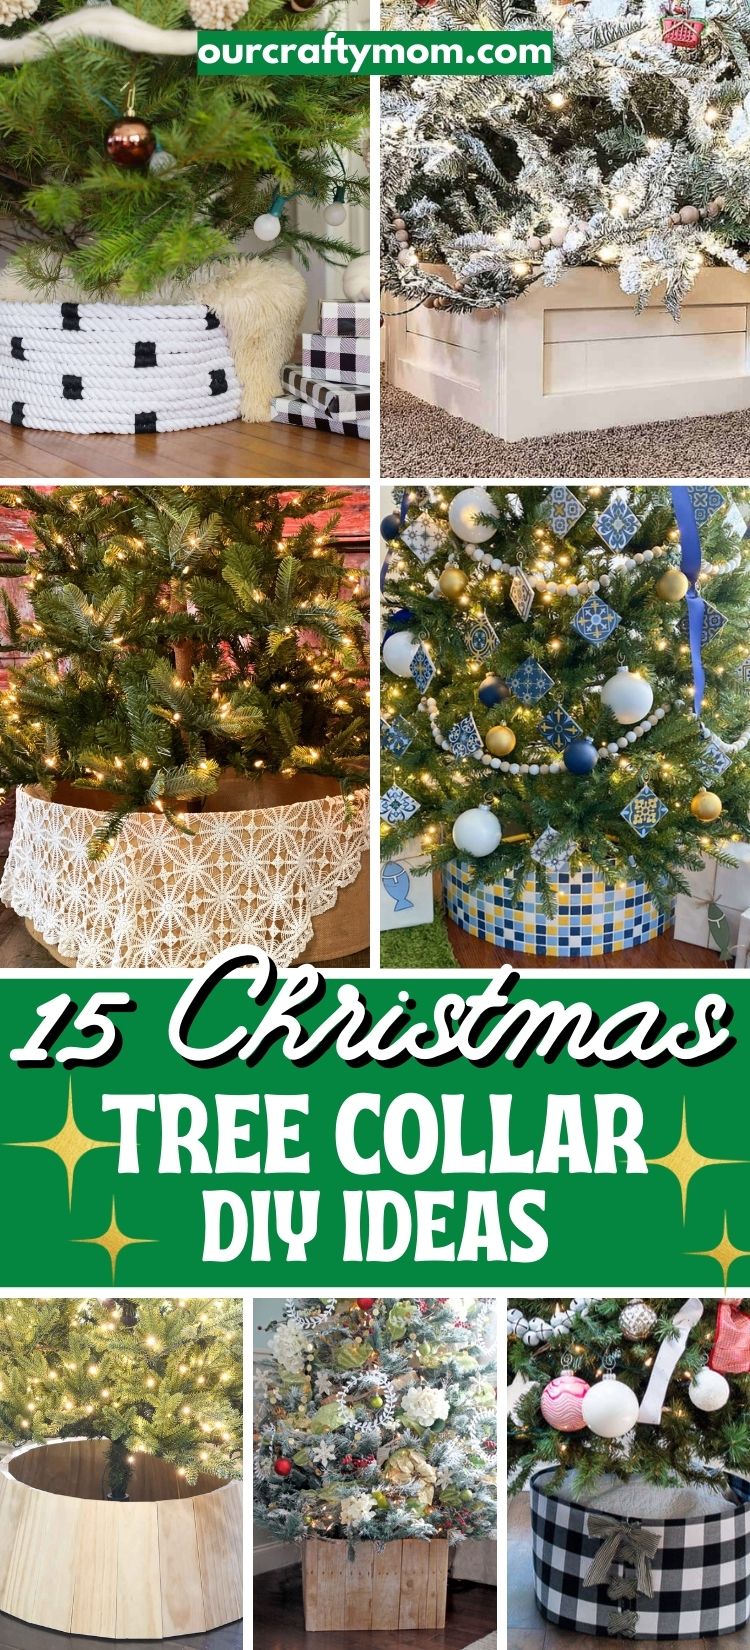 Christmas tree collars pin collage with text